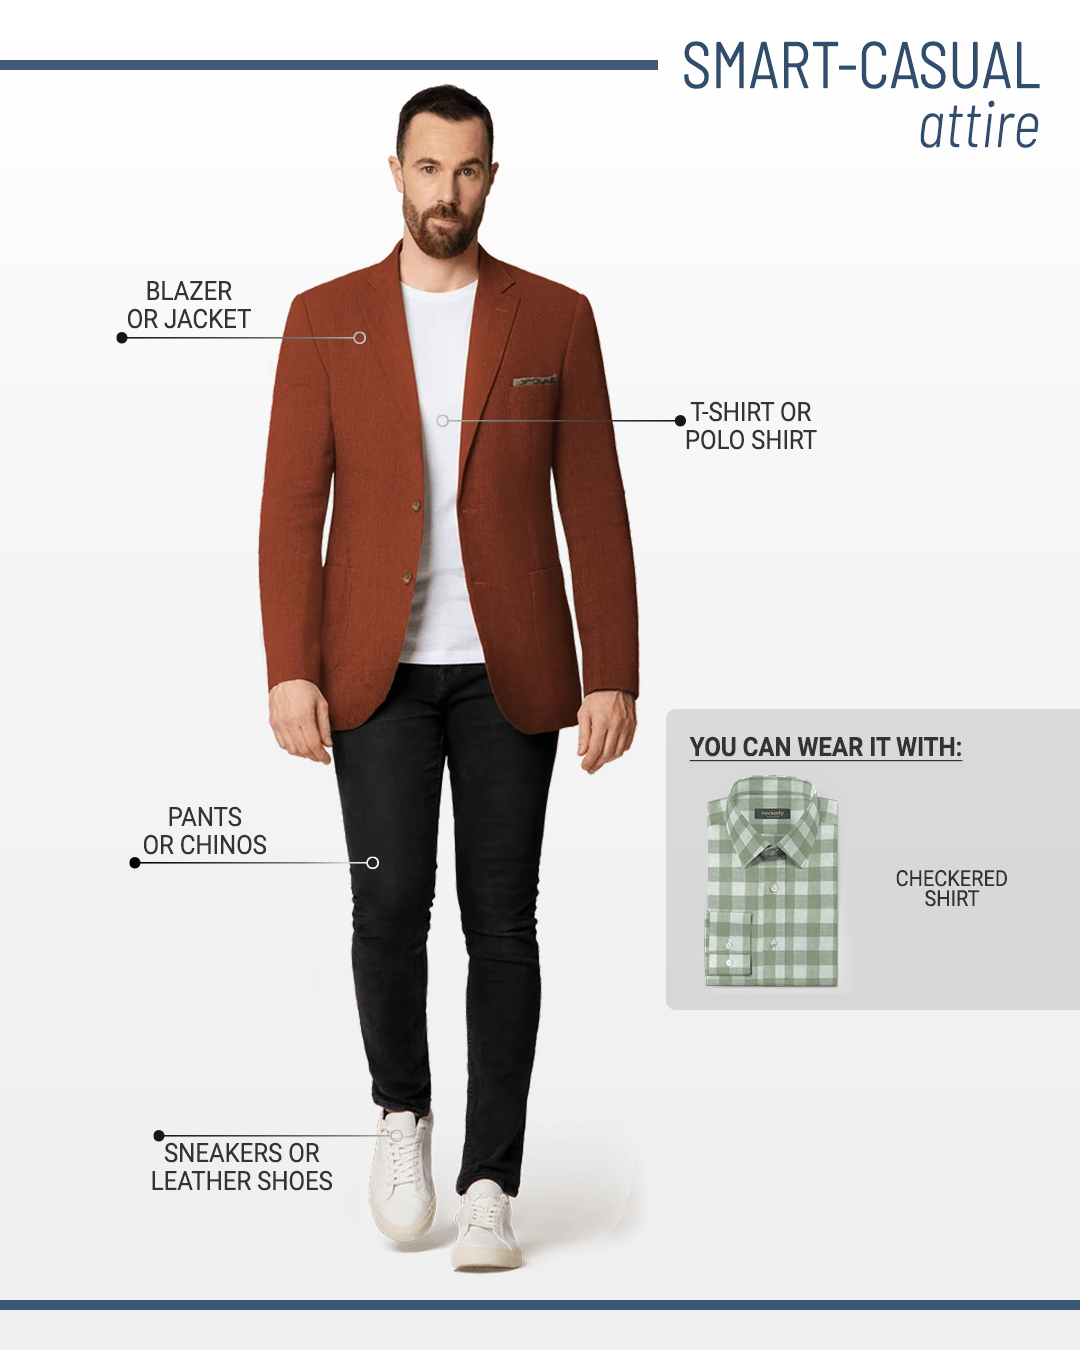 Smart casual dress code and attire for men